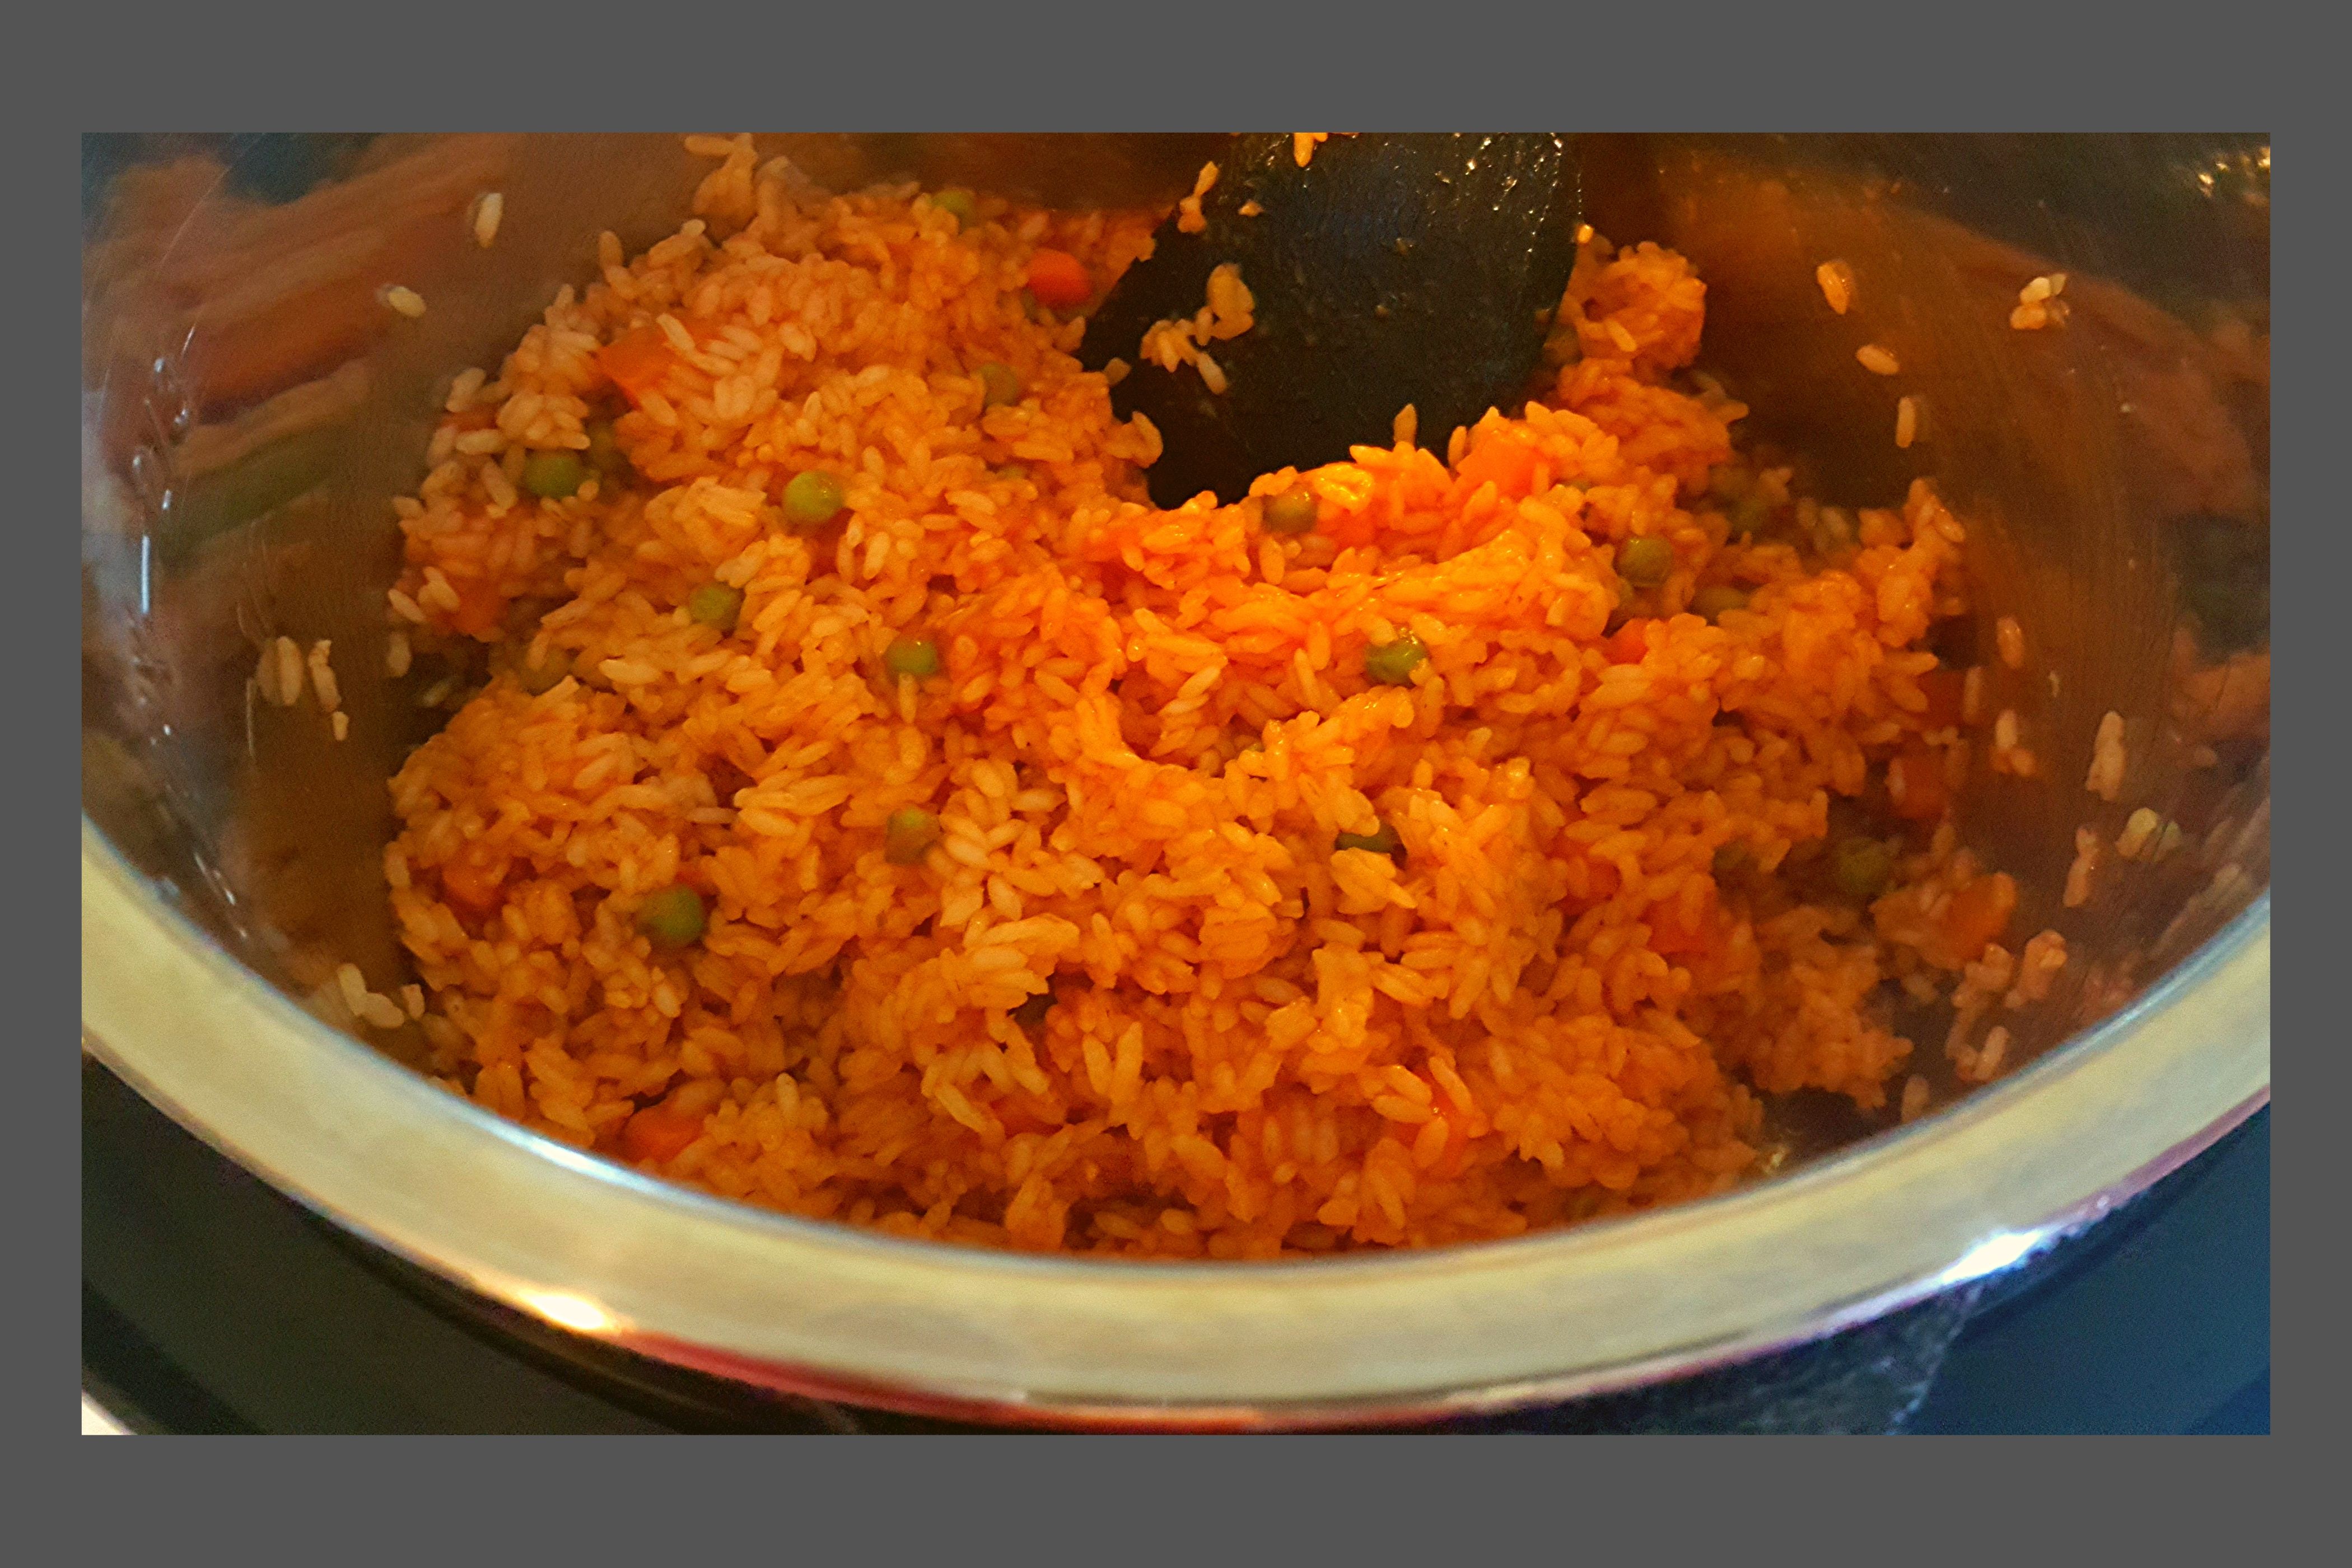 An Instant Pot filled with cooked mexican \ spanish rice with peas and carrotts.